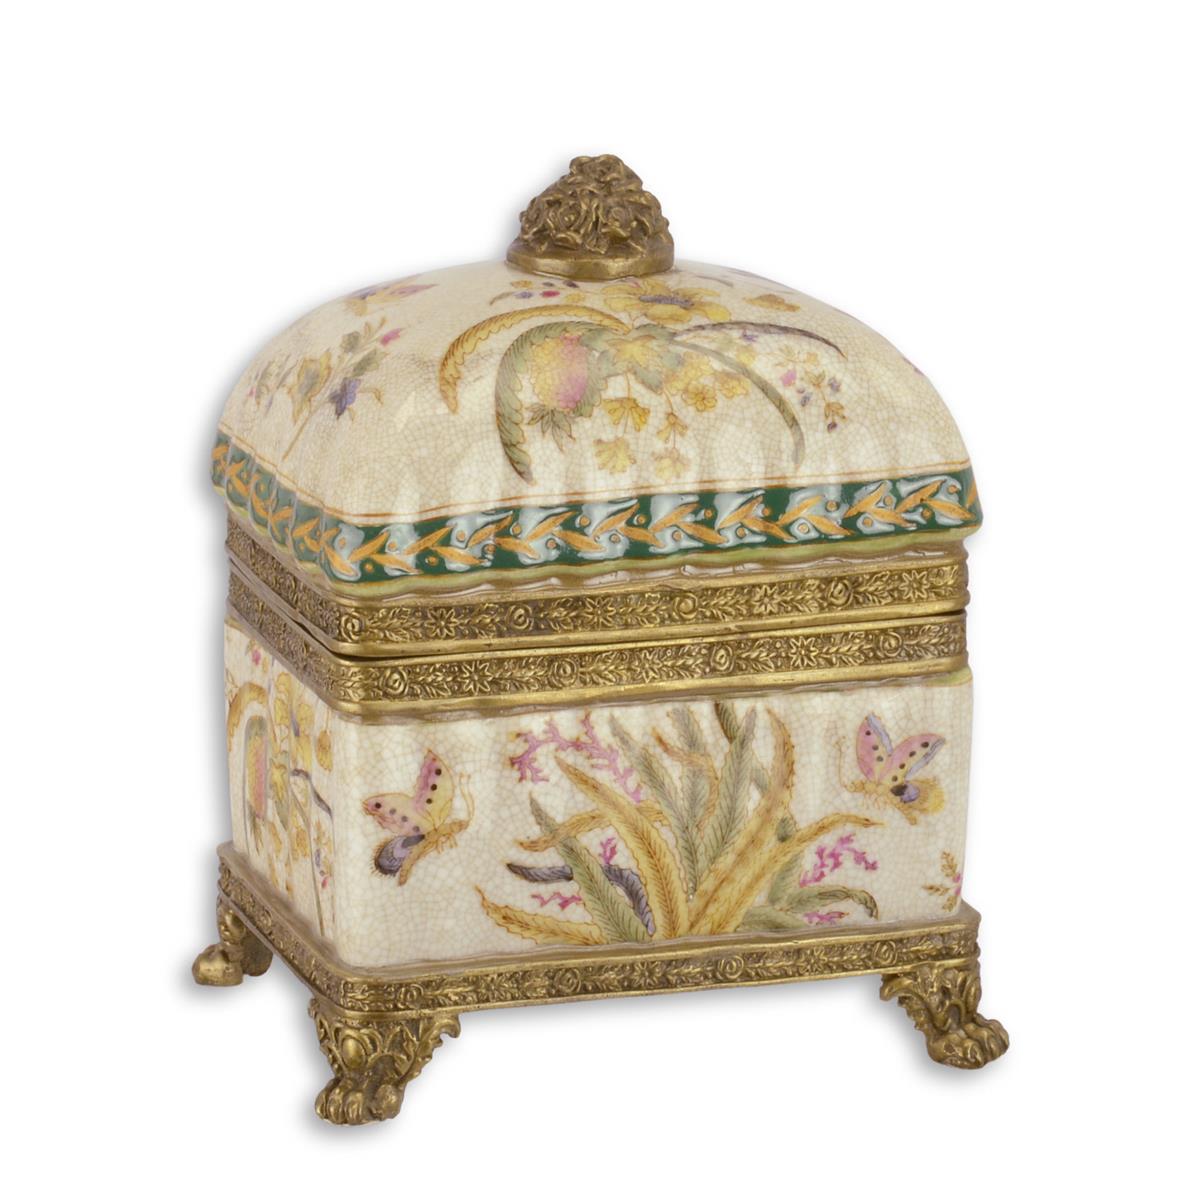 A BRASS MOUNTED PORCELAIN BOX AND COVER